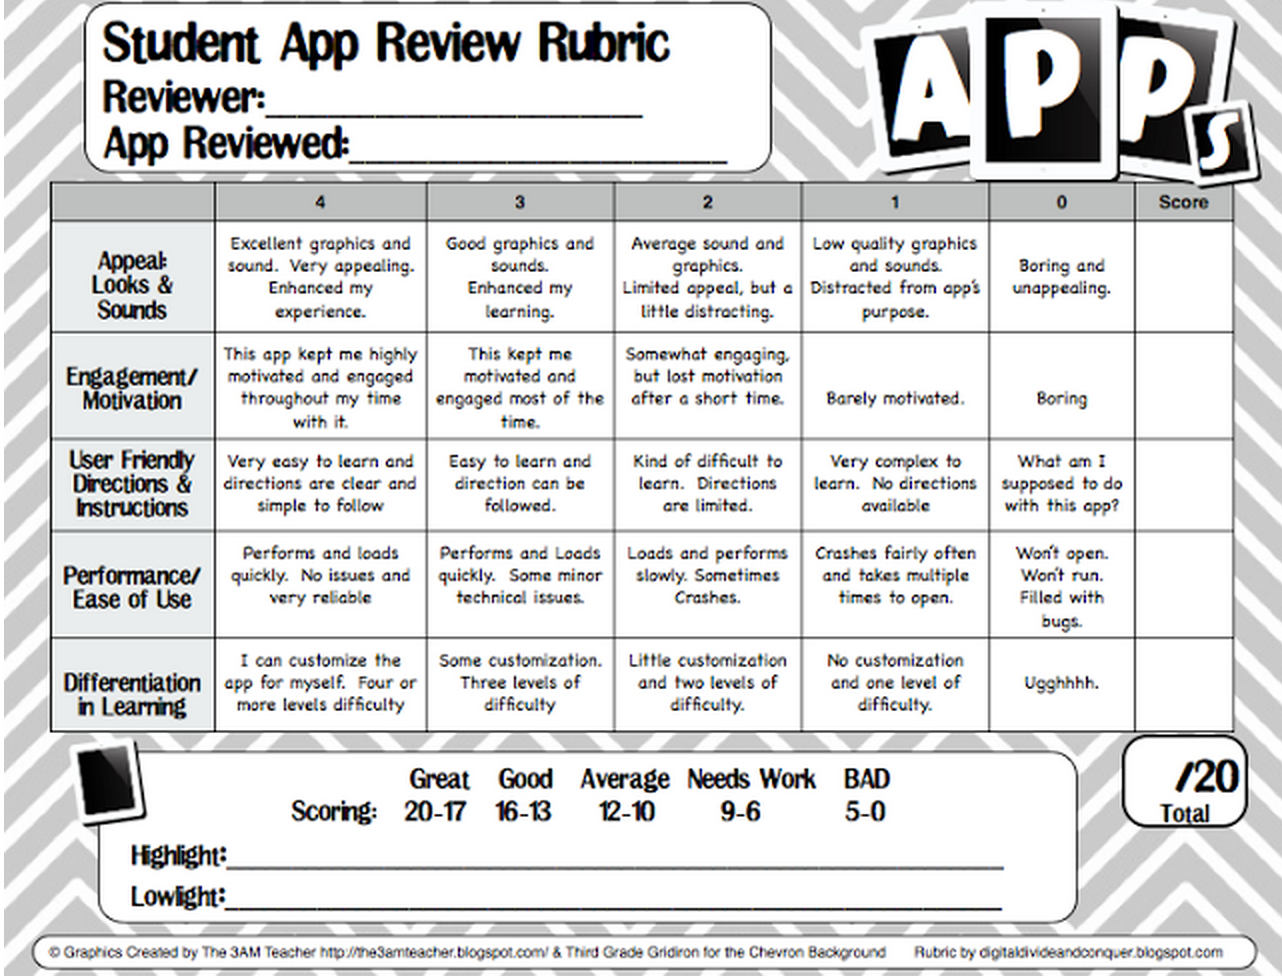 A Great Student Rubric for Reviewing Apps | Educational Technology and Mobile Learning1282 x 980